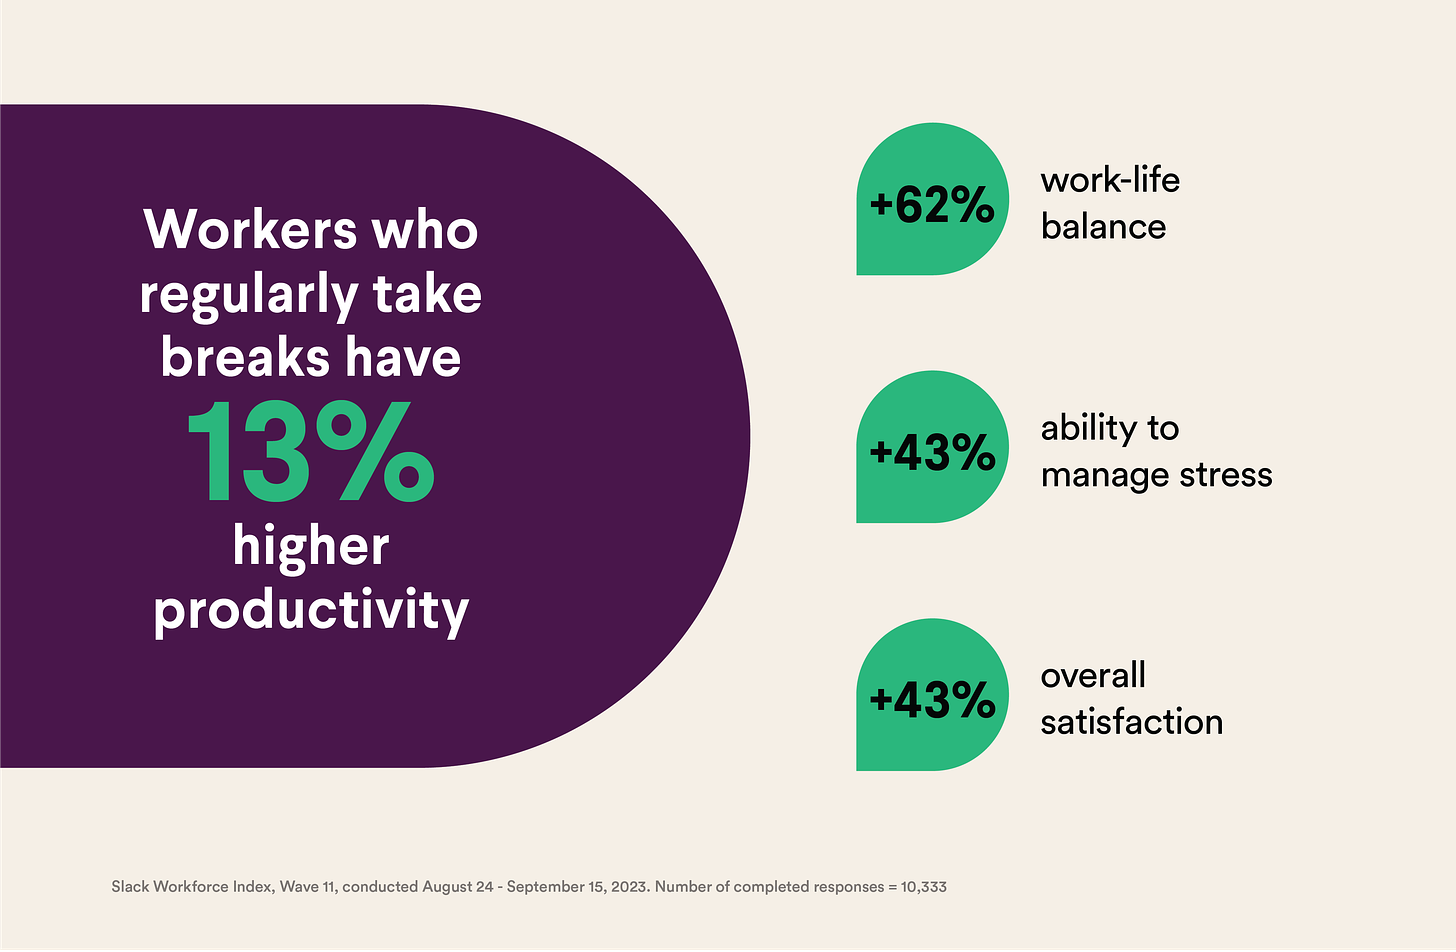 Workers who regularly take breaks have 13% higher productivity